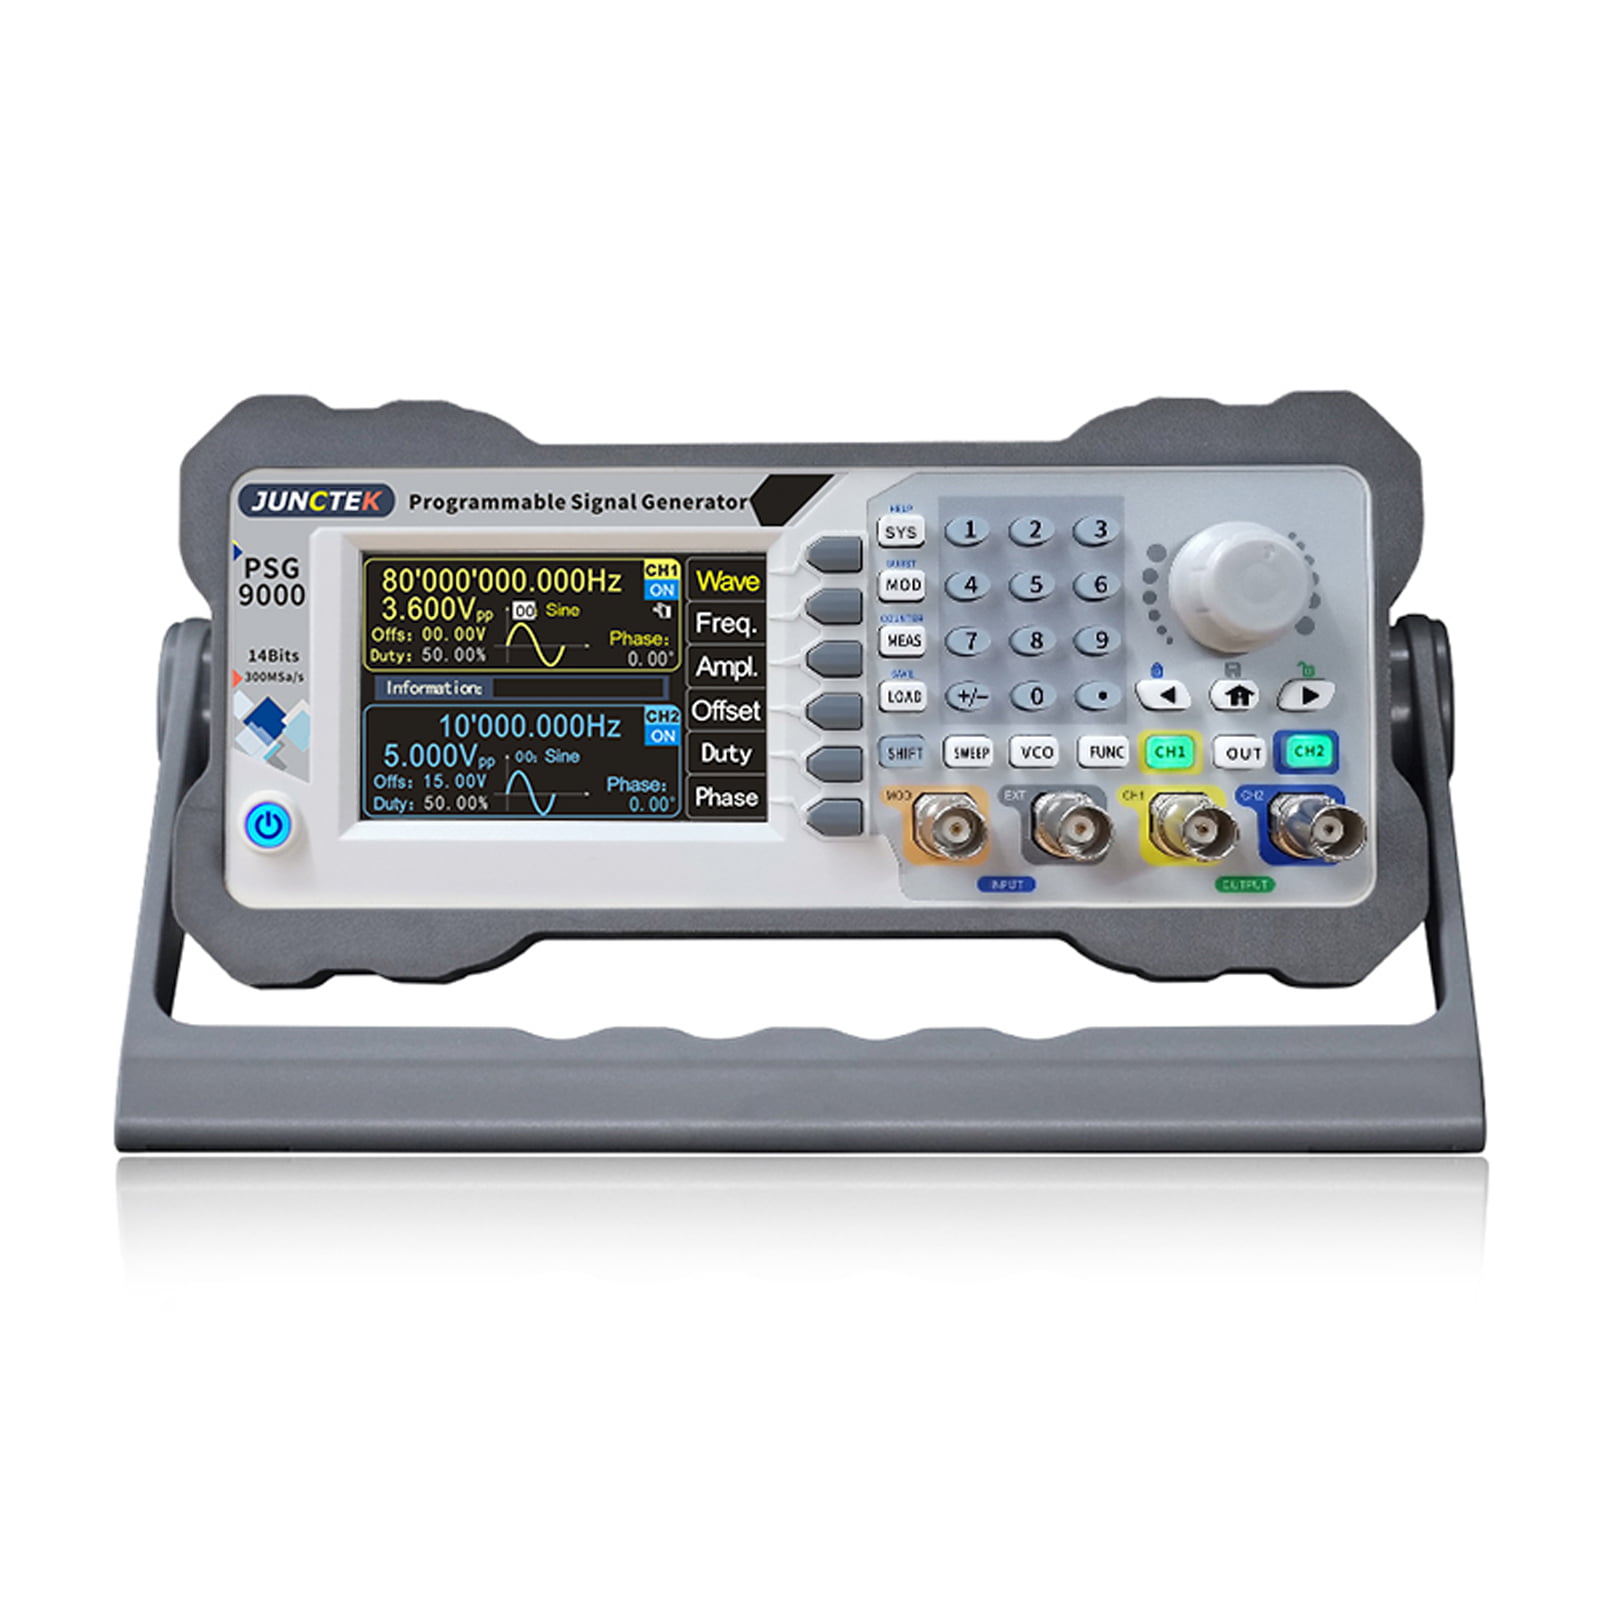 Details about   3.5'' LCD Programmable Function Signal Generator 80MHz 300MSA/S Sampling Rate 